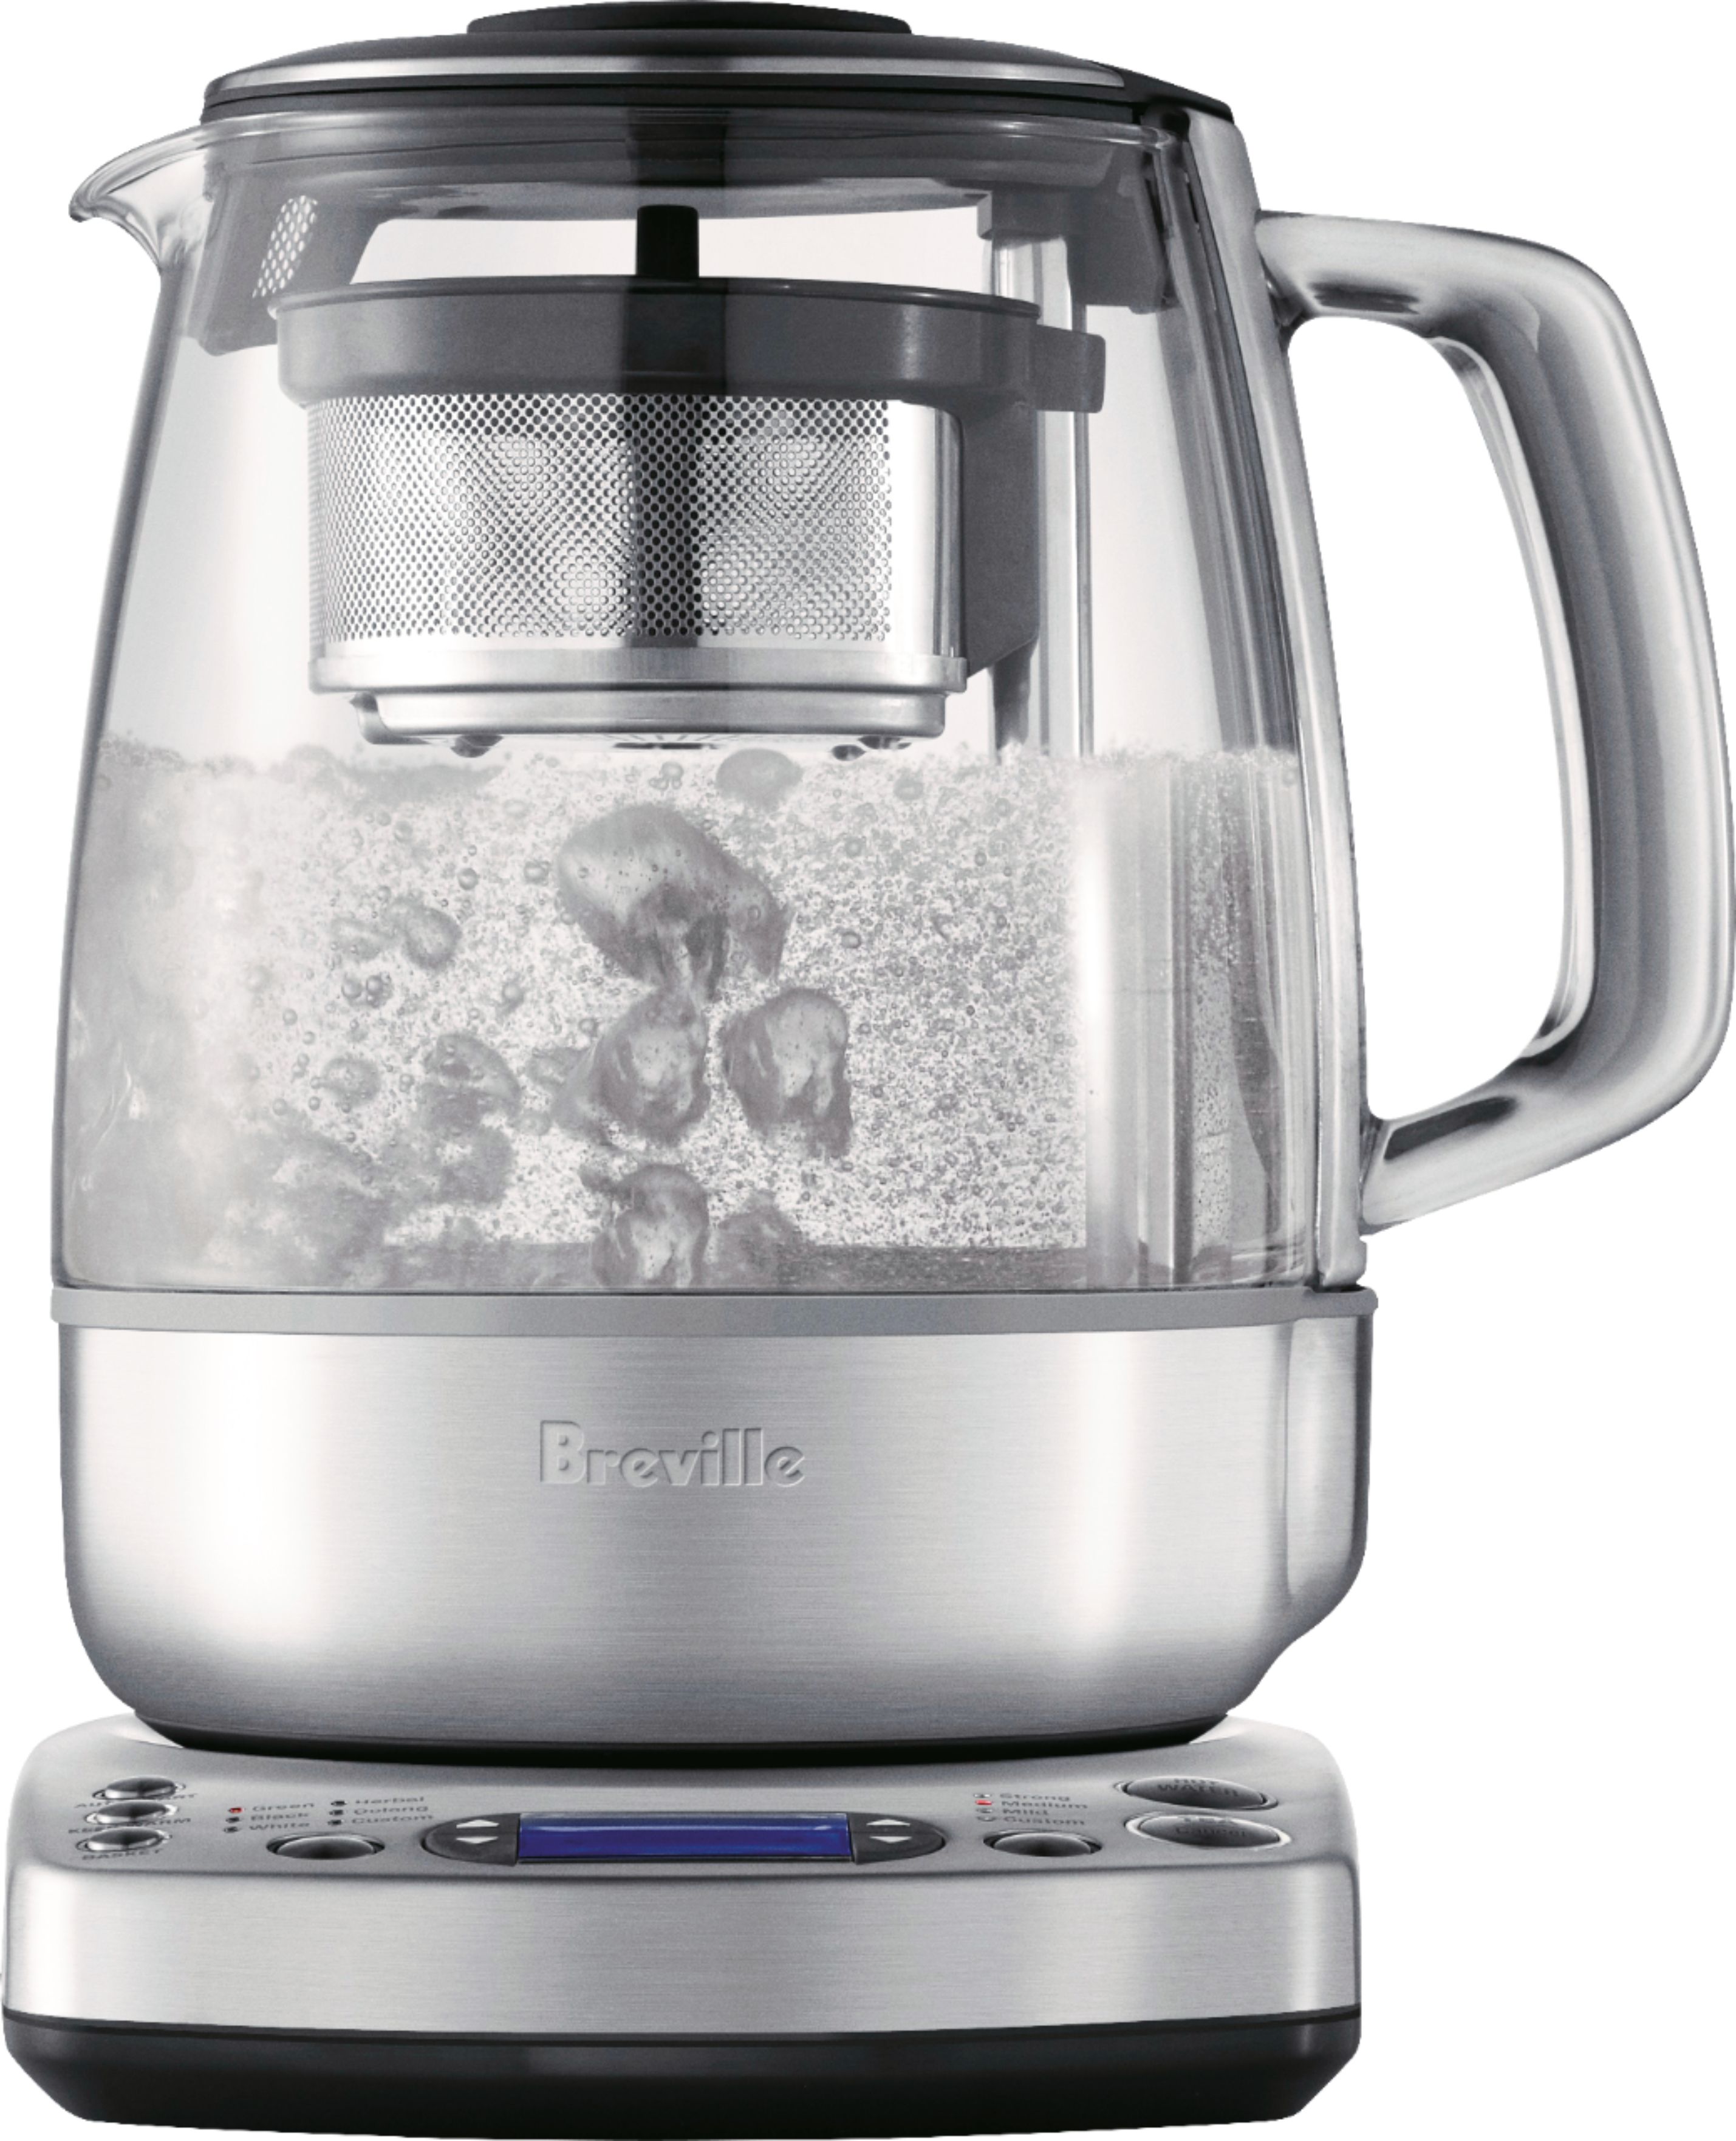 Breville Tea Maker - Getting My Tea Fix in a New Way — Thrifty